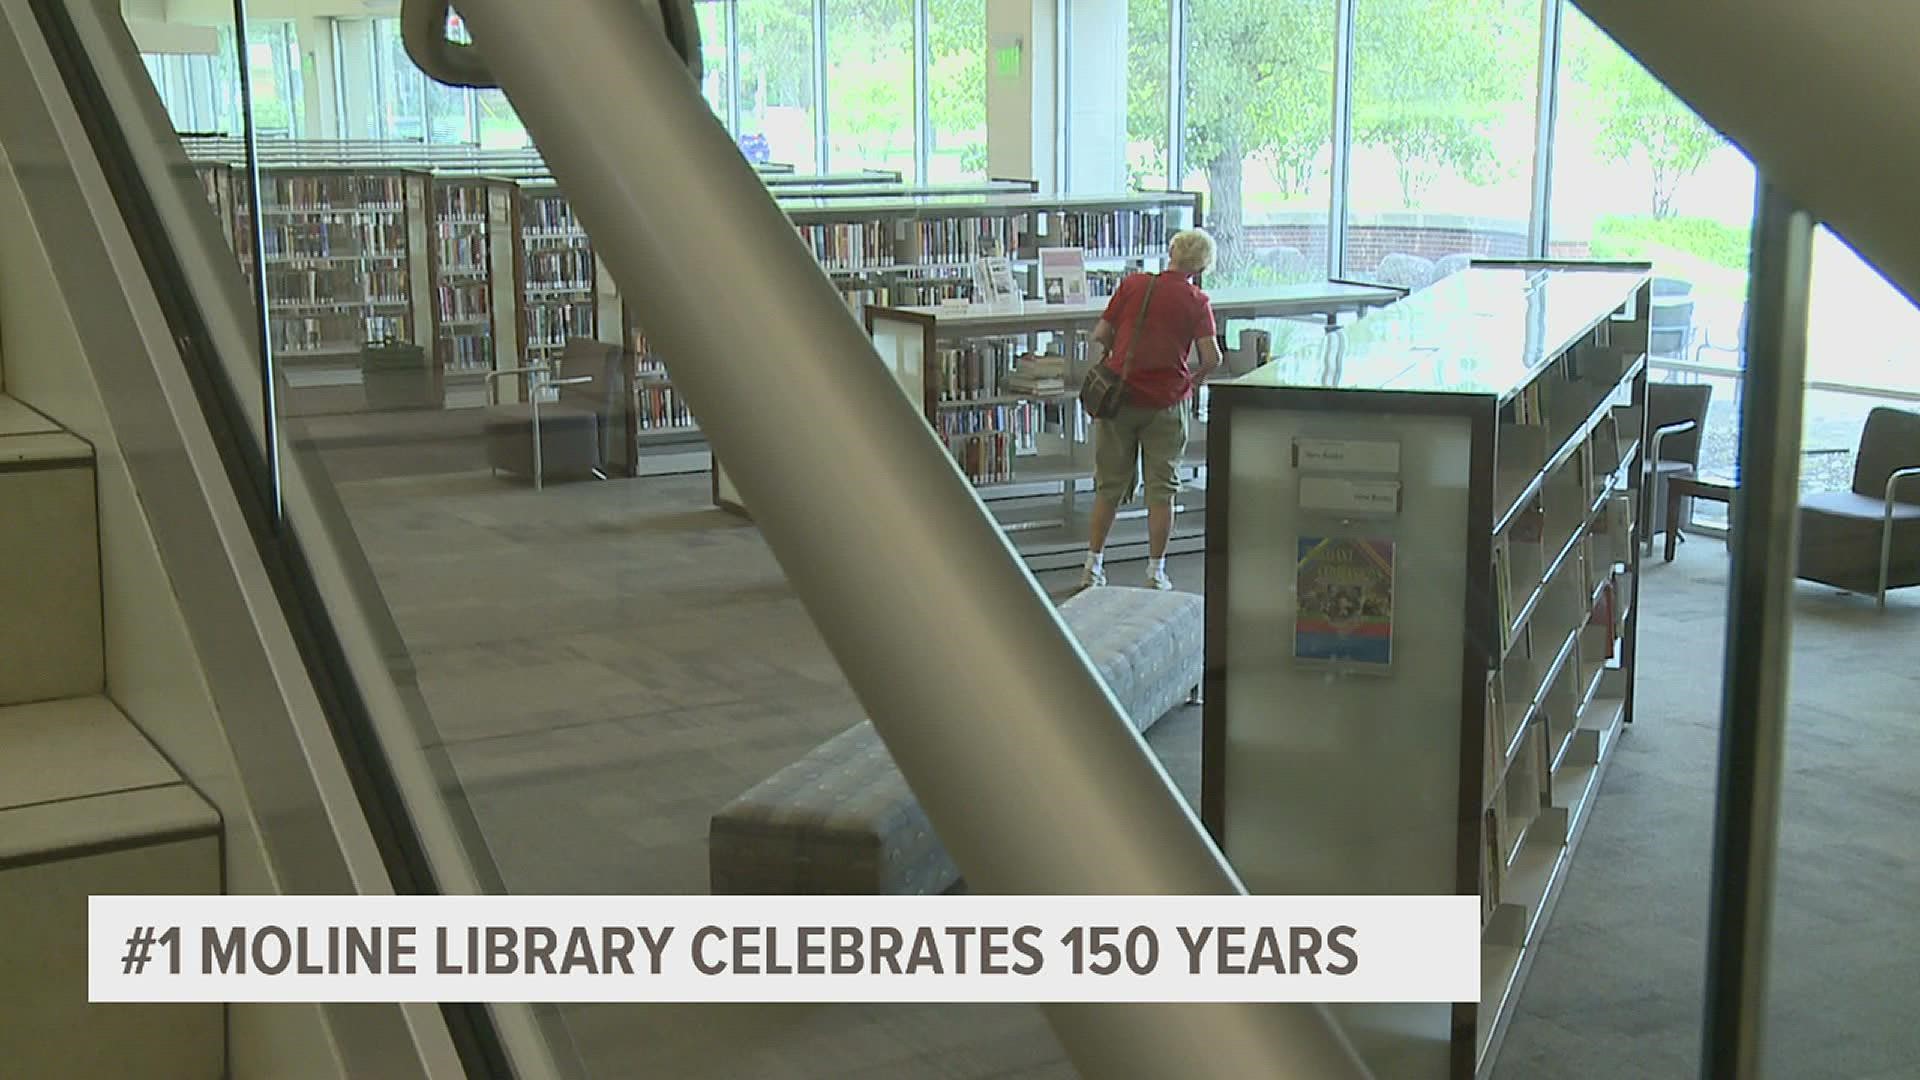 Moline Library celebrates 150 years, Davenport citizens can apply to be placed on voucher program waitlist and rains expected in QCA today.